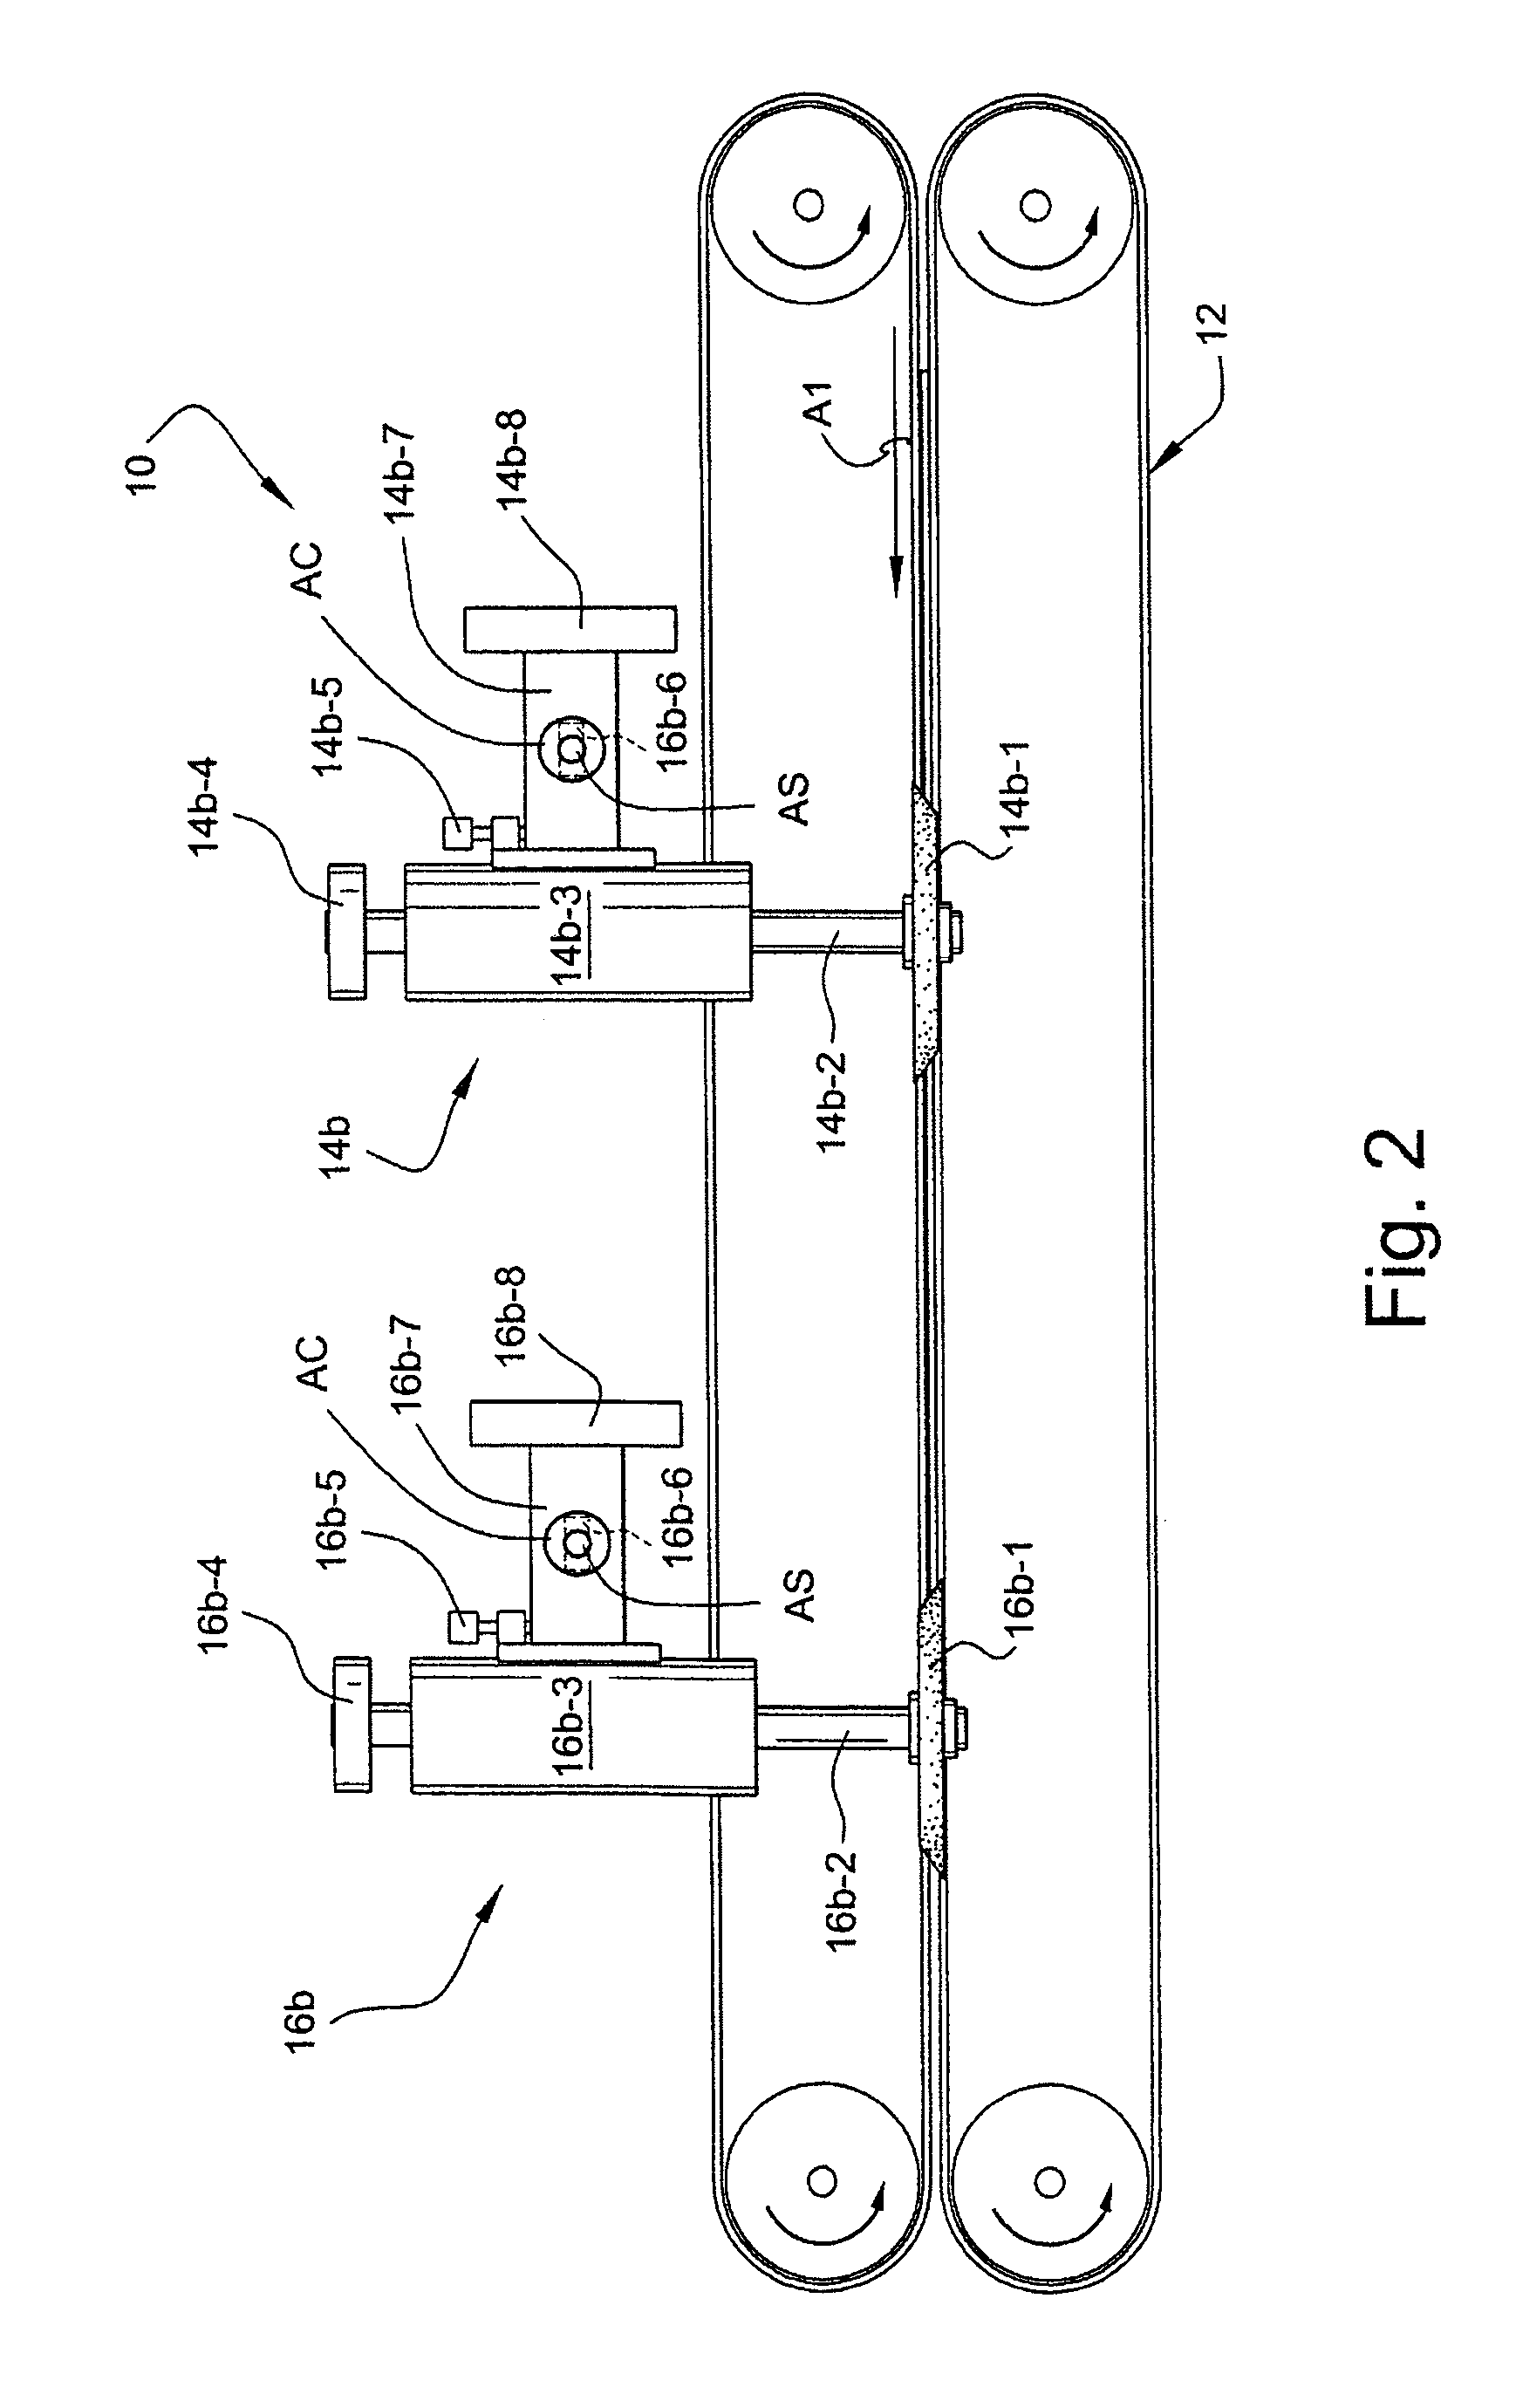 Methods and systems for finishing edges of glass sheets